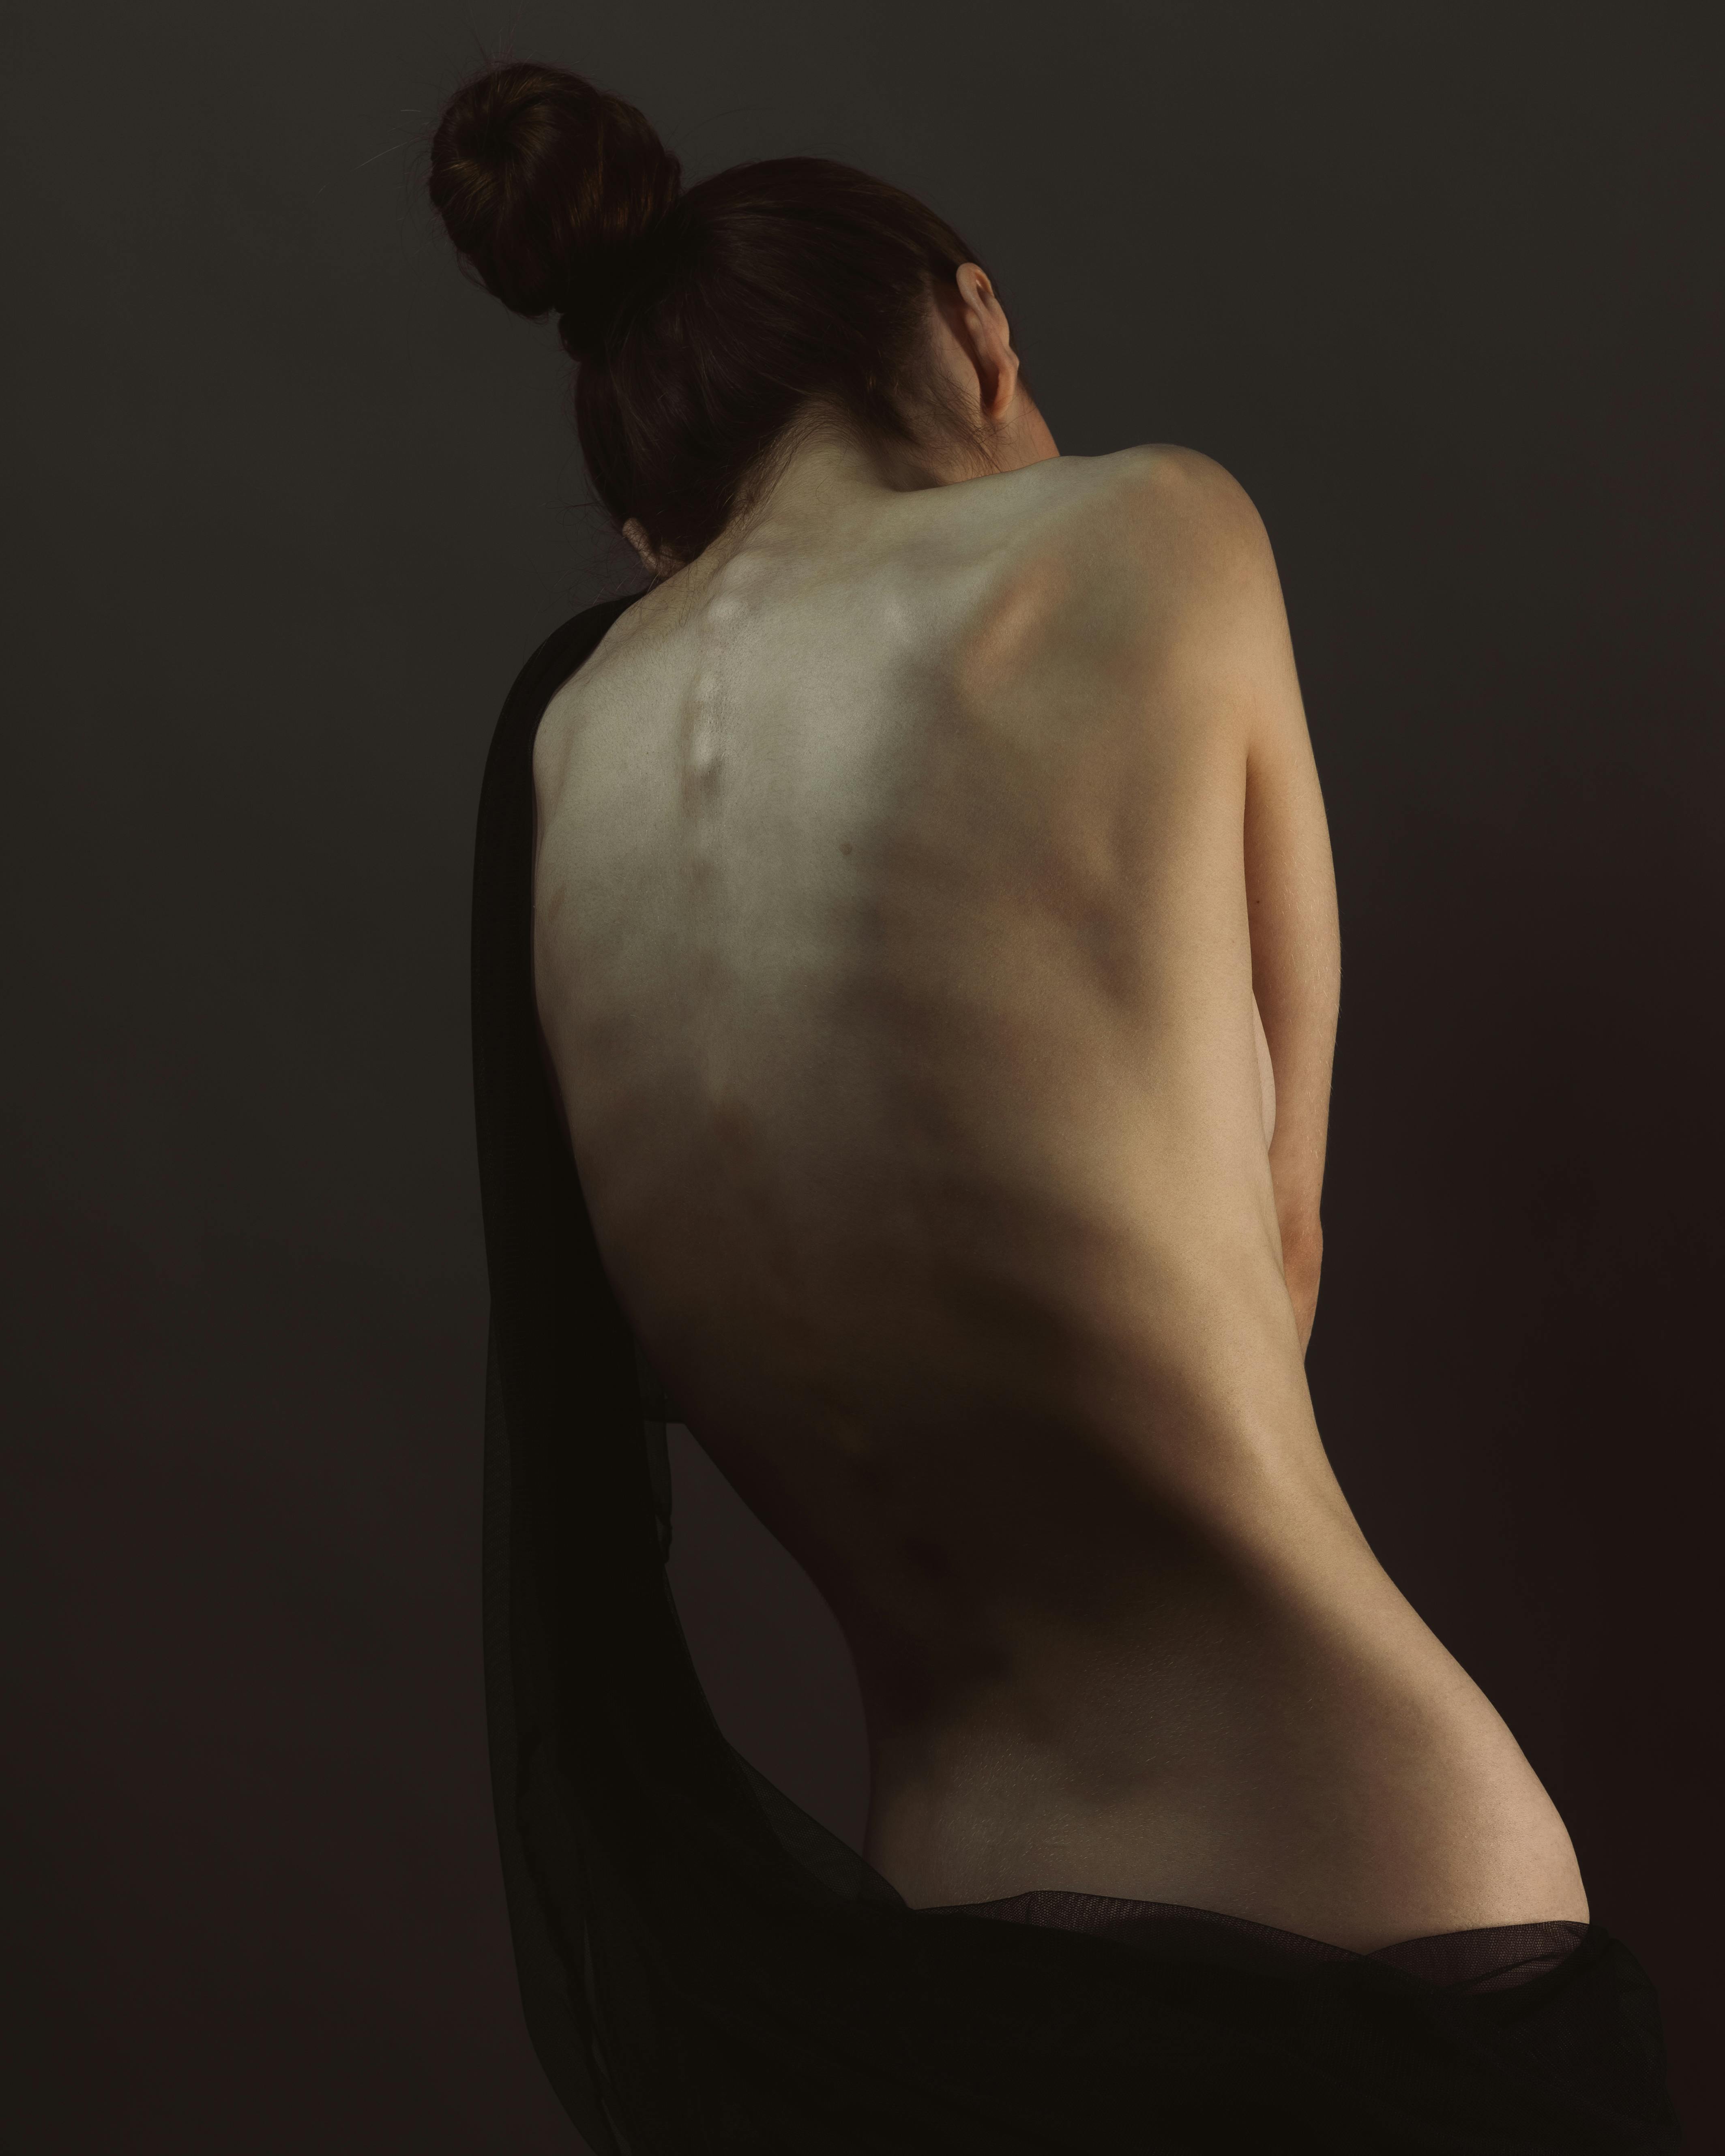 photo of a topless woman s back